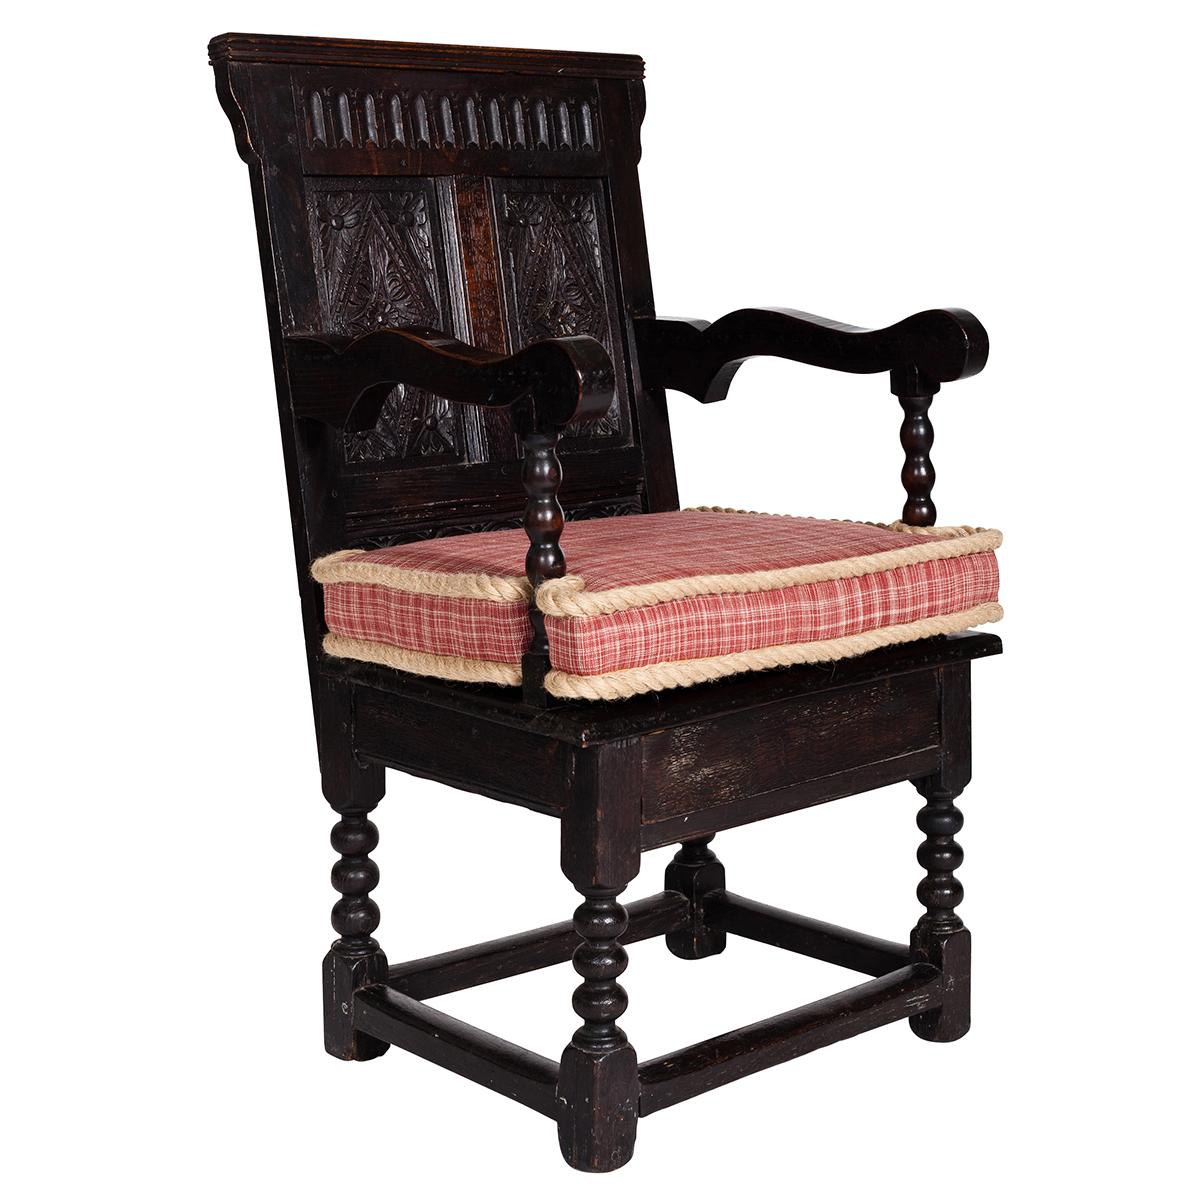 Crafted by joiners in the 17th century, oak Wainscot chairs are immediately recognizable, with their broad, crested backs, extensive Gothic-style carving, and blocky joints. Early inhabitants of Colonial America, along with the first settlers,